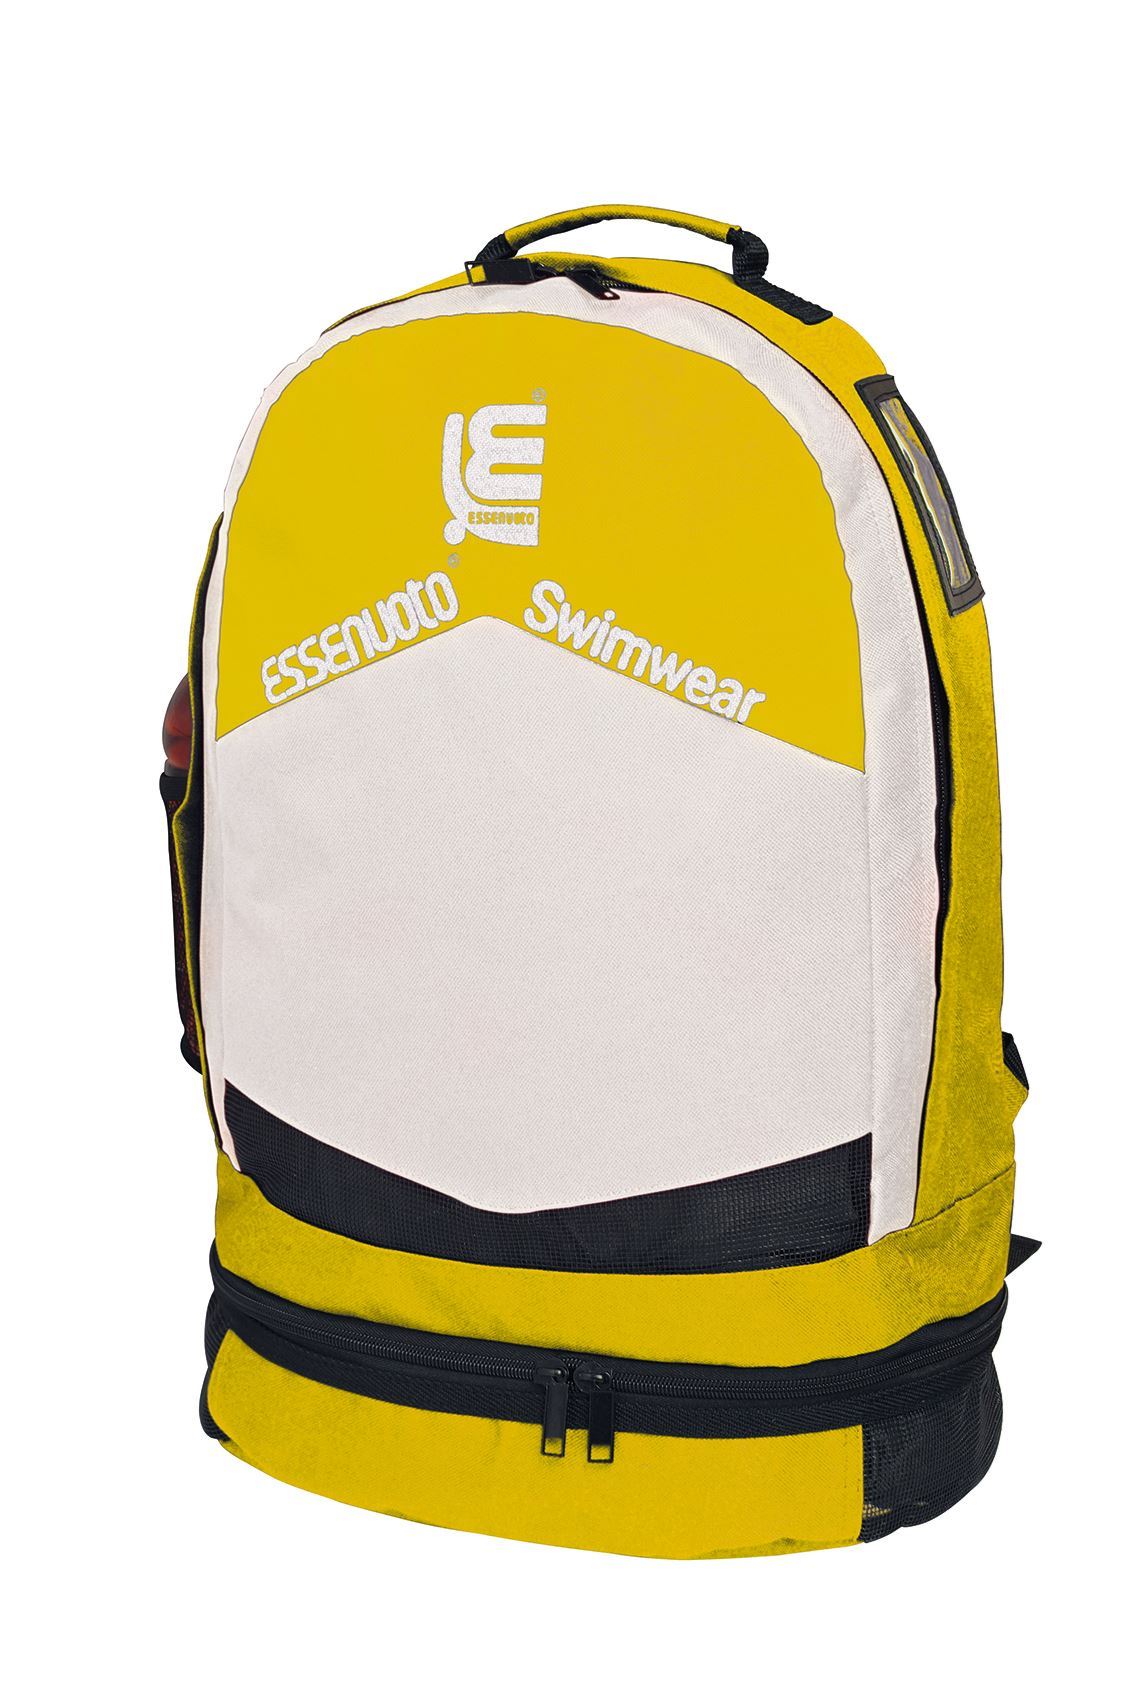 200002 - BACK PACK YELLOW WHITE WITH SOFT SHOULDER STRAP 